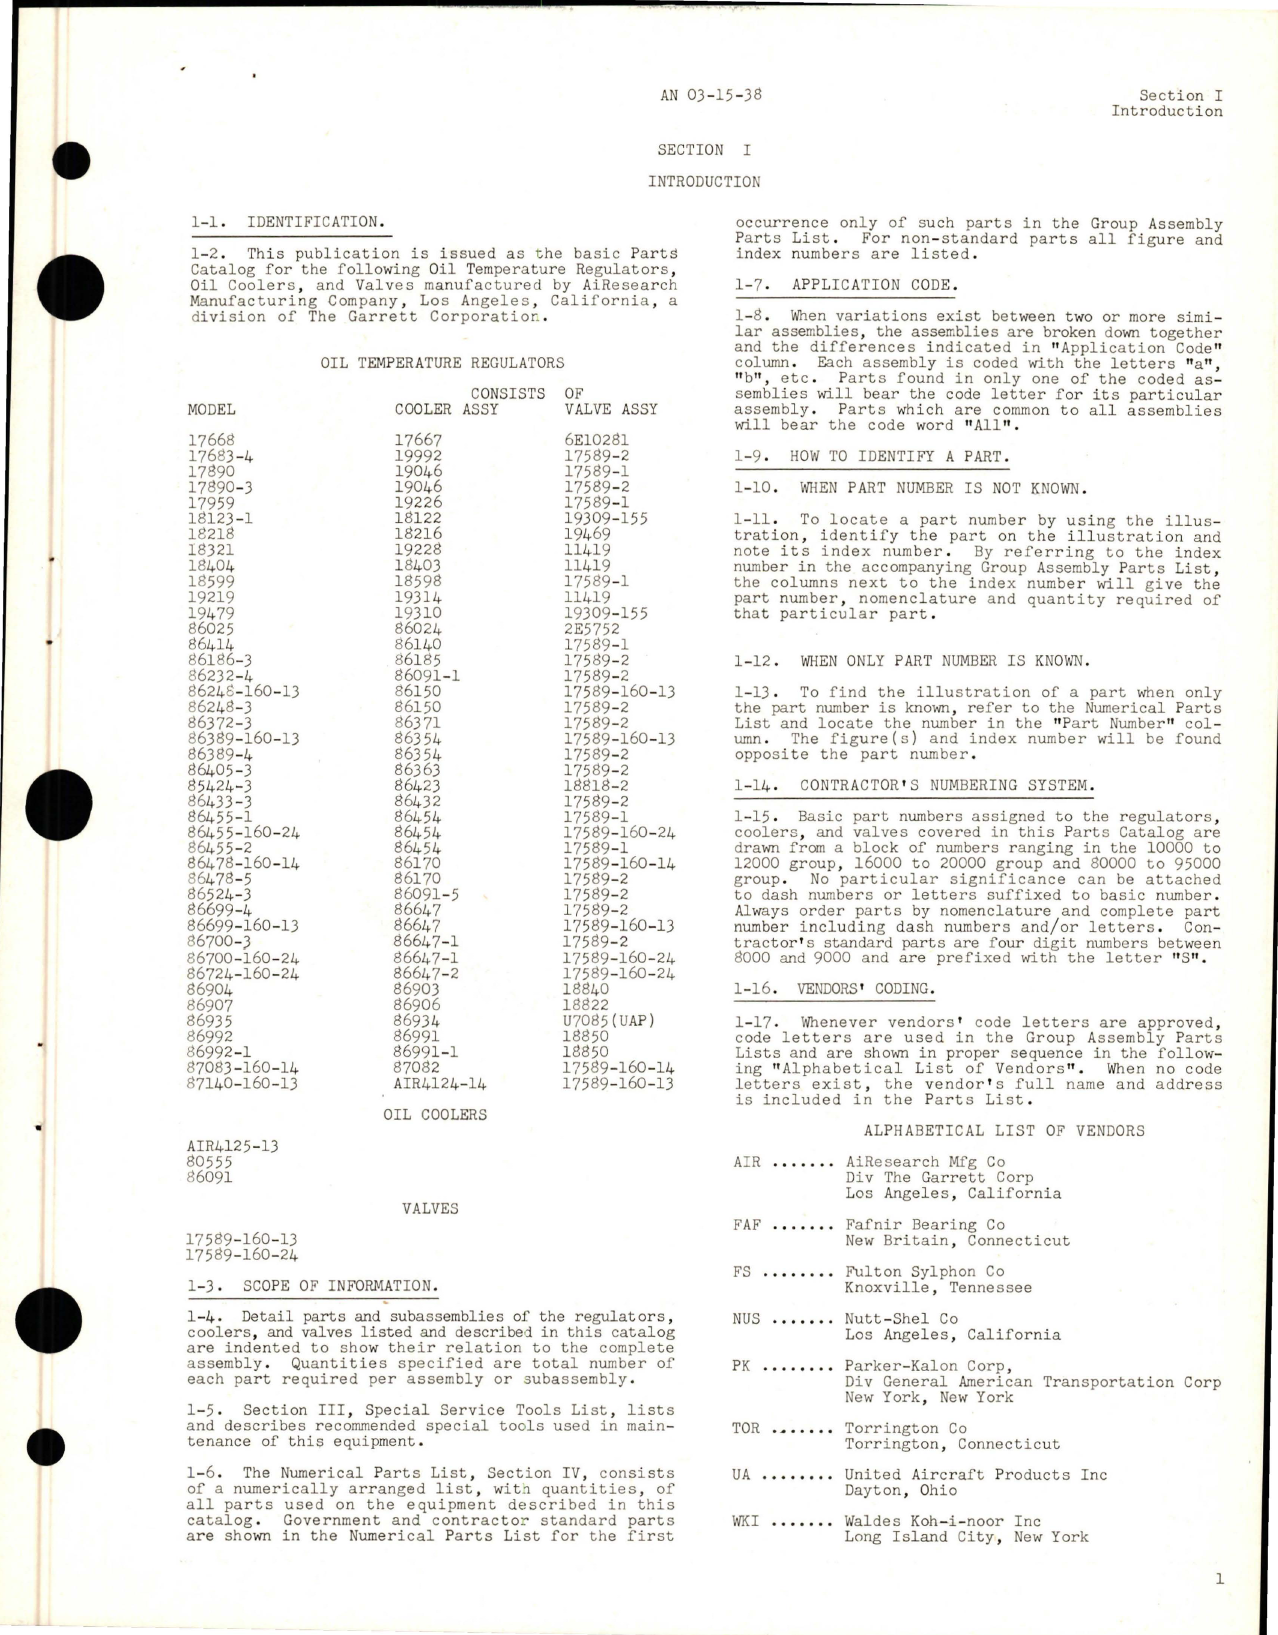 Sample page 5 from AirCorps Library document: Parts Catalog for Oil Temperature Regulators - Oil Coolers - Valves